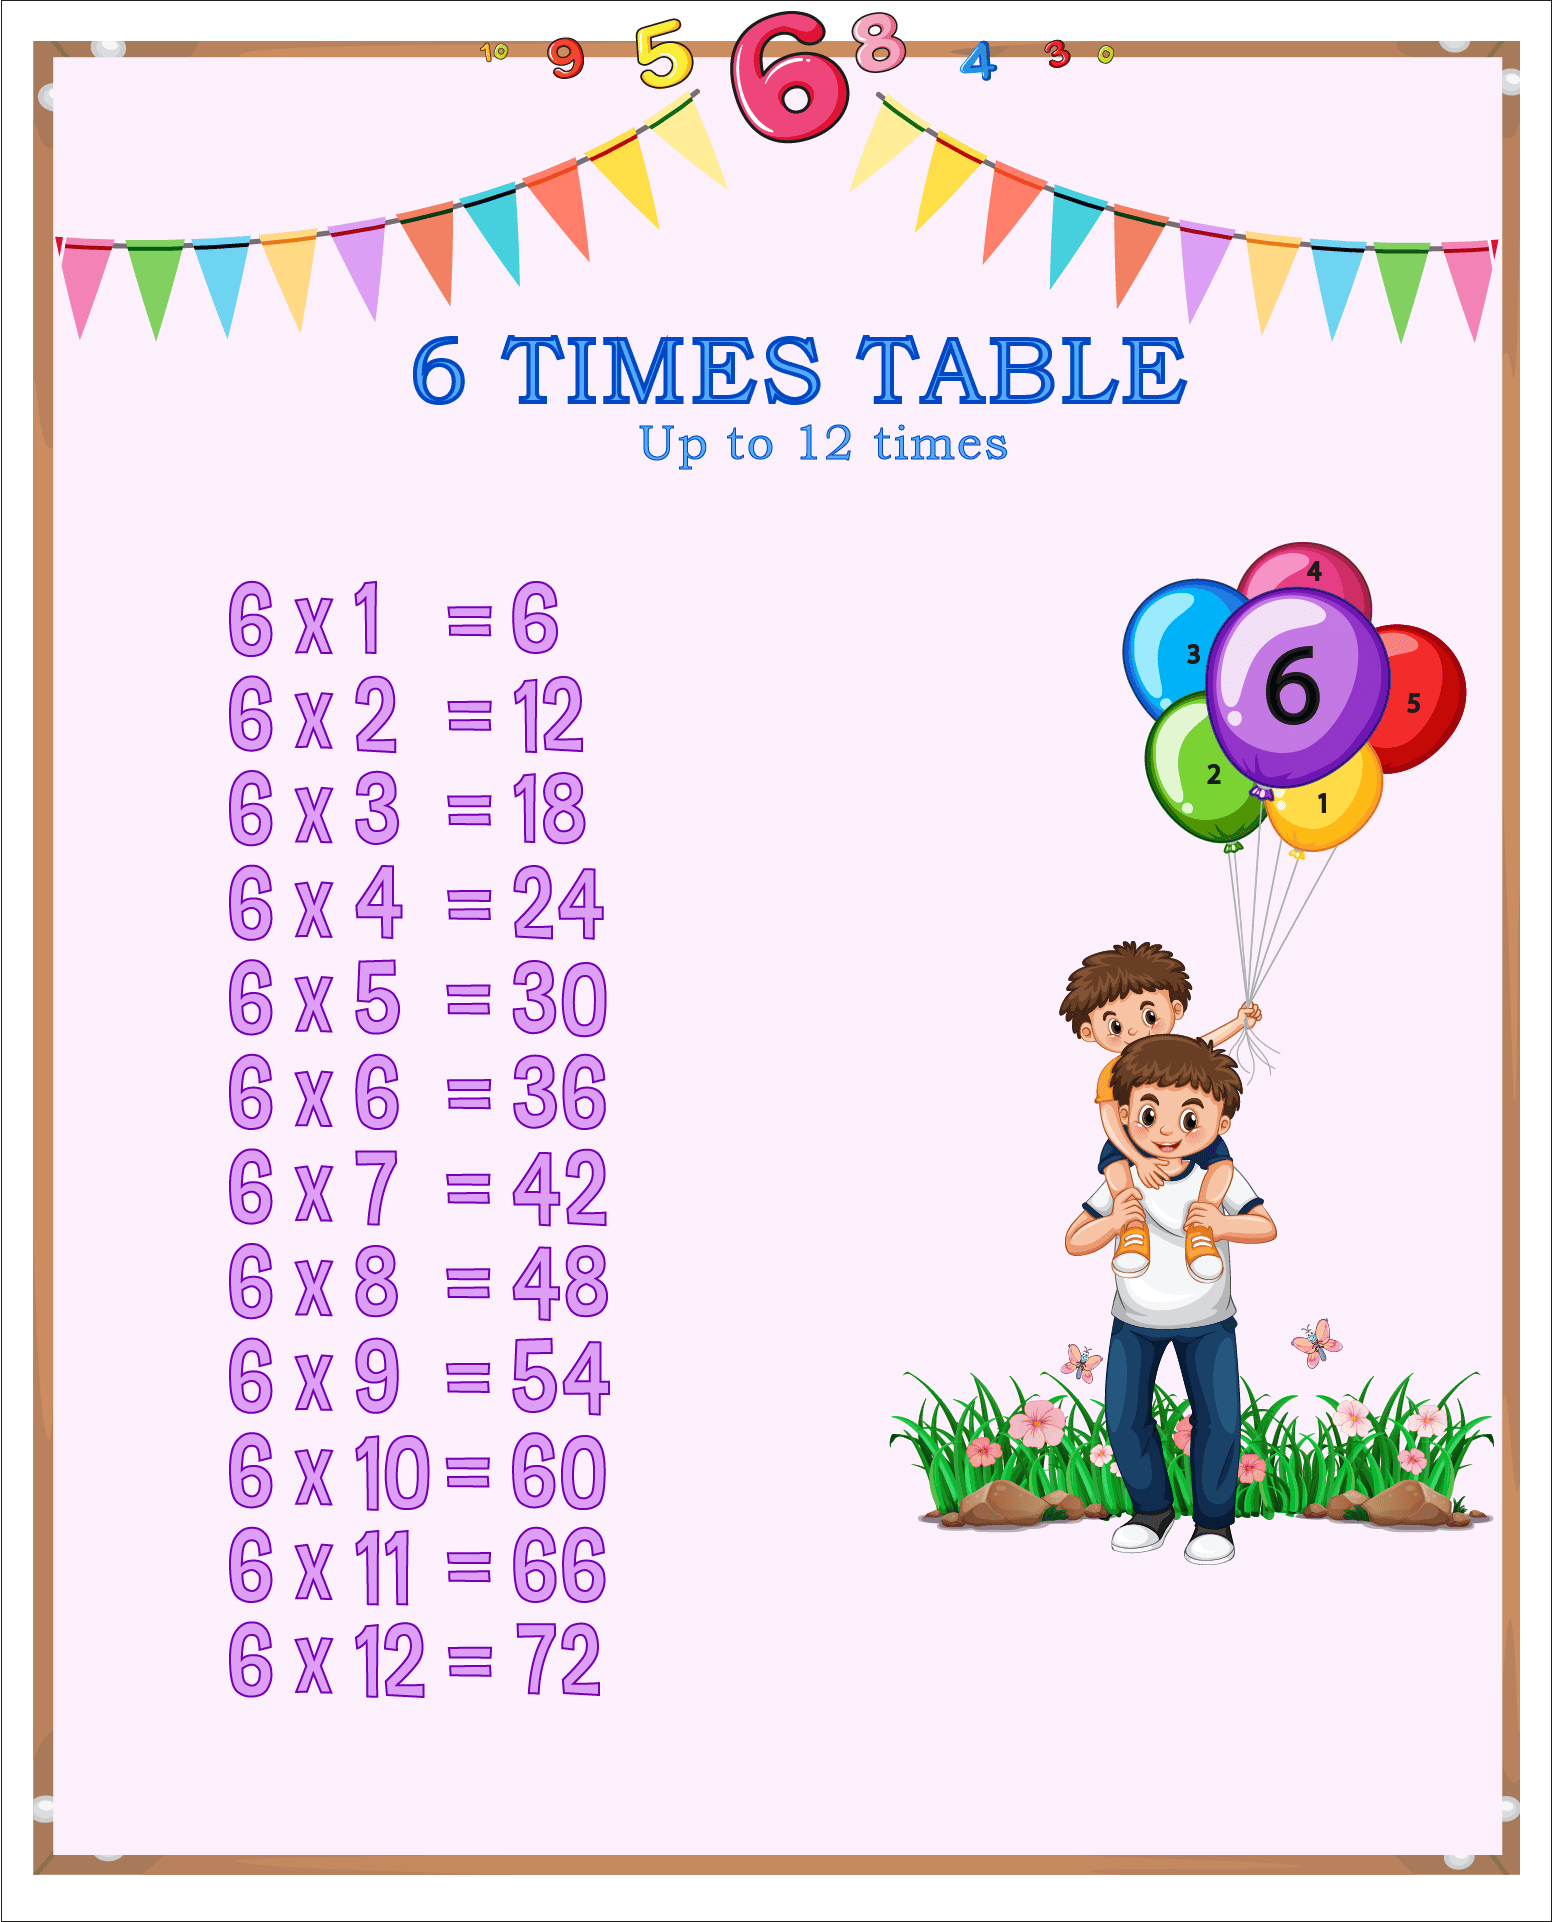 6 Times Table upto 12 times